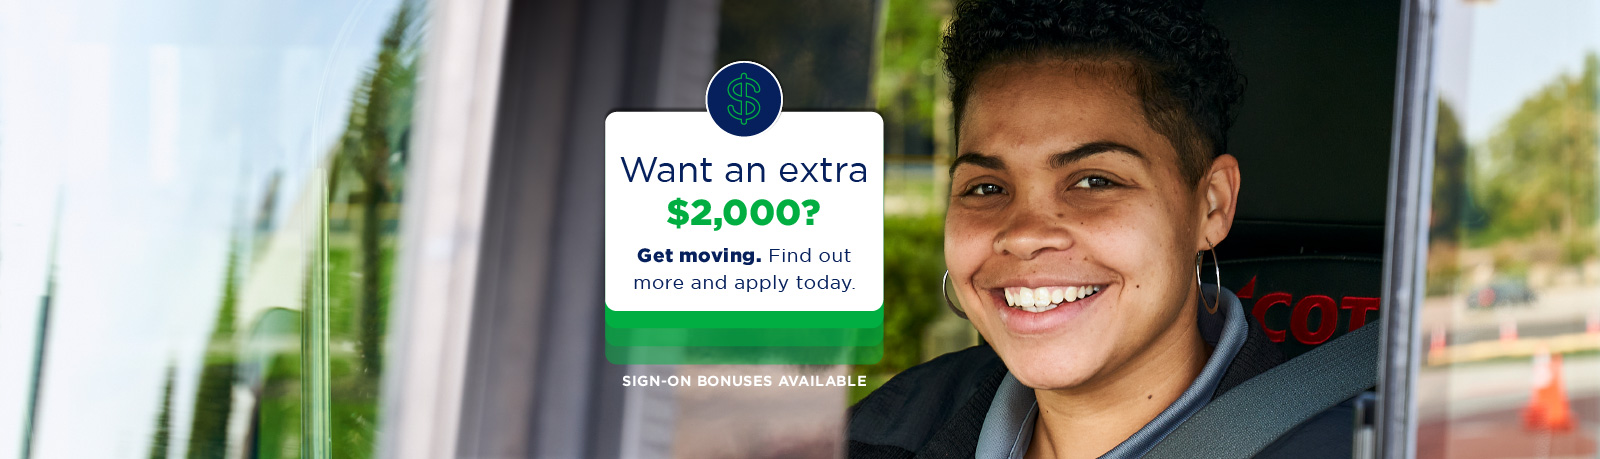 Want an extra $2,000? Sign-on bonuses available (conditions apply). Join Team COTA!